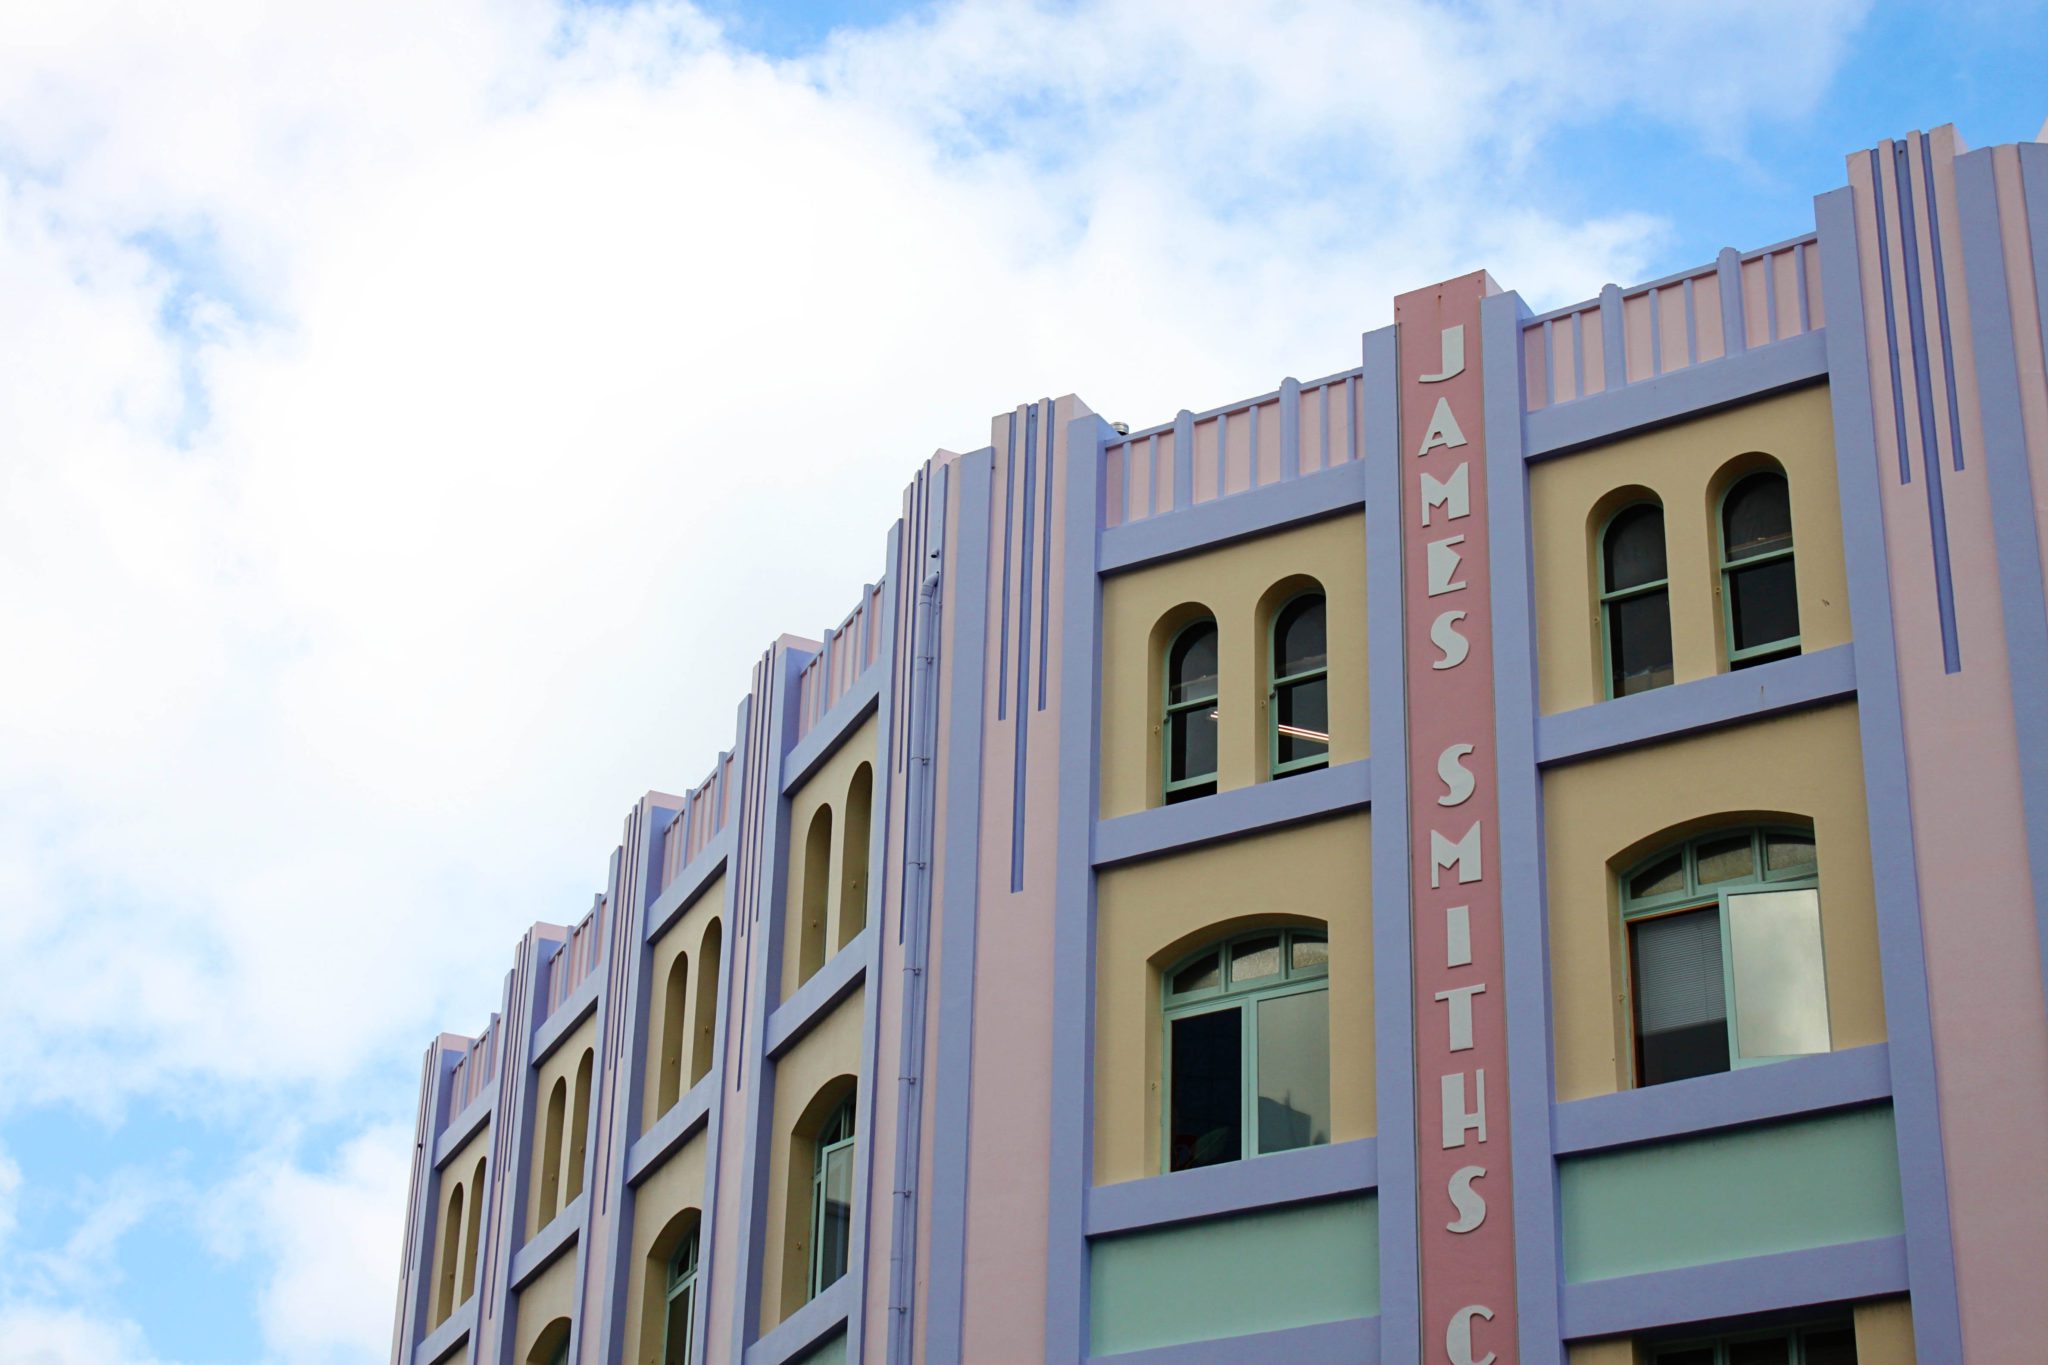 Discover the coolest street in Wellington New Zealand | 6 Fun things to do in Wellington New Zealand with kids | Cuba Street #wellington #newzeland #simplywander #cubastreet